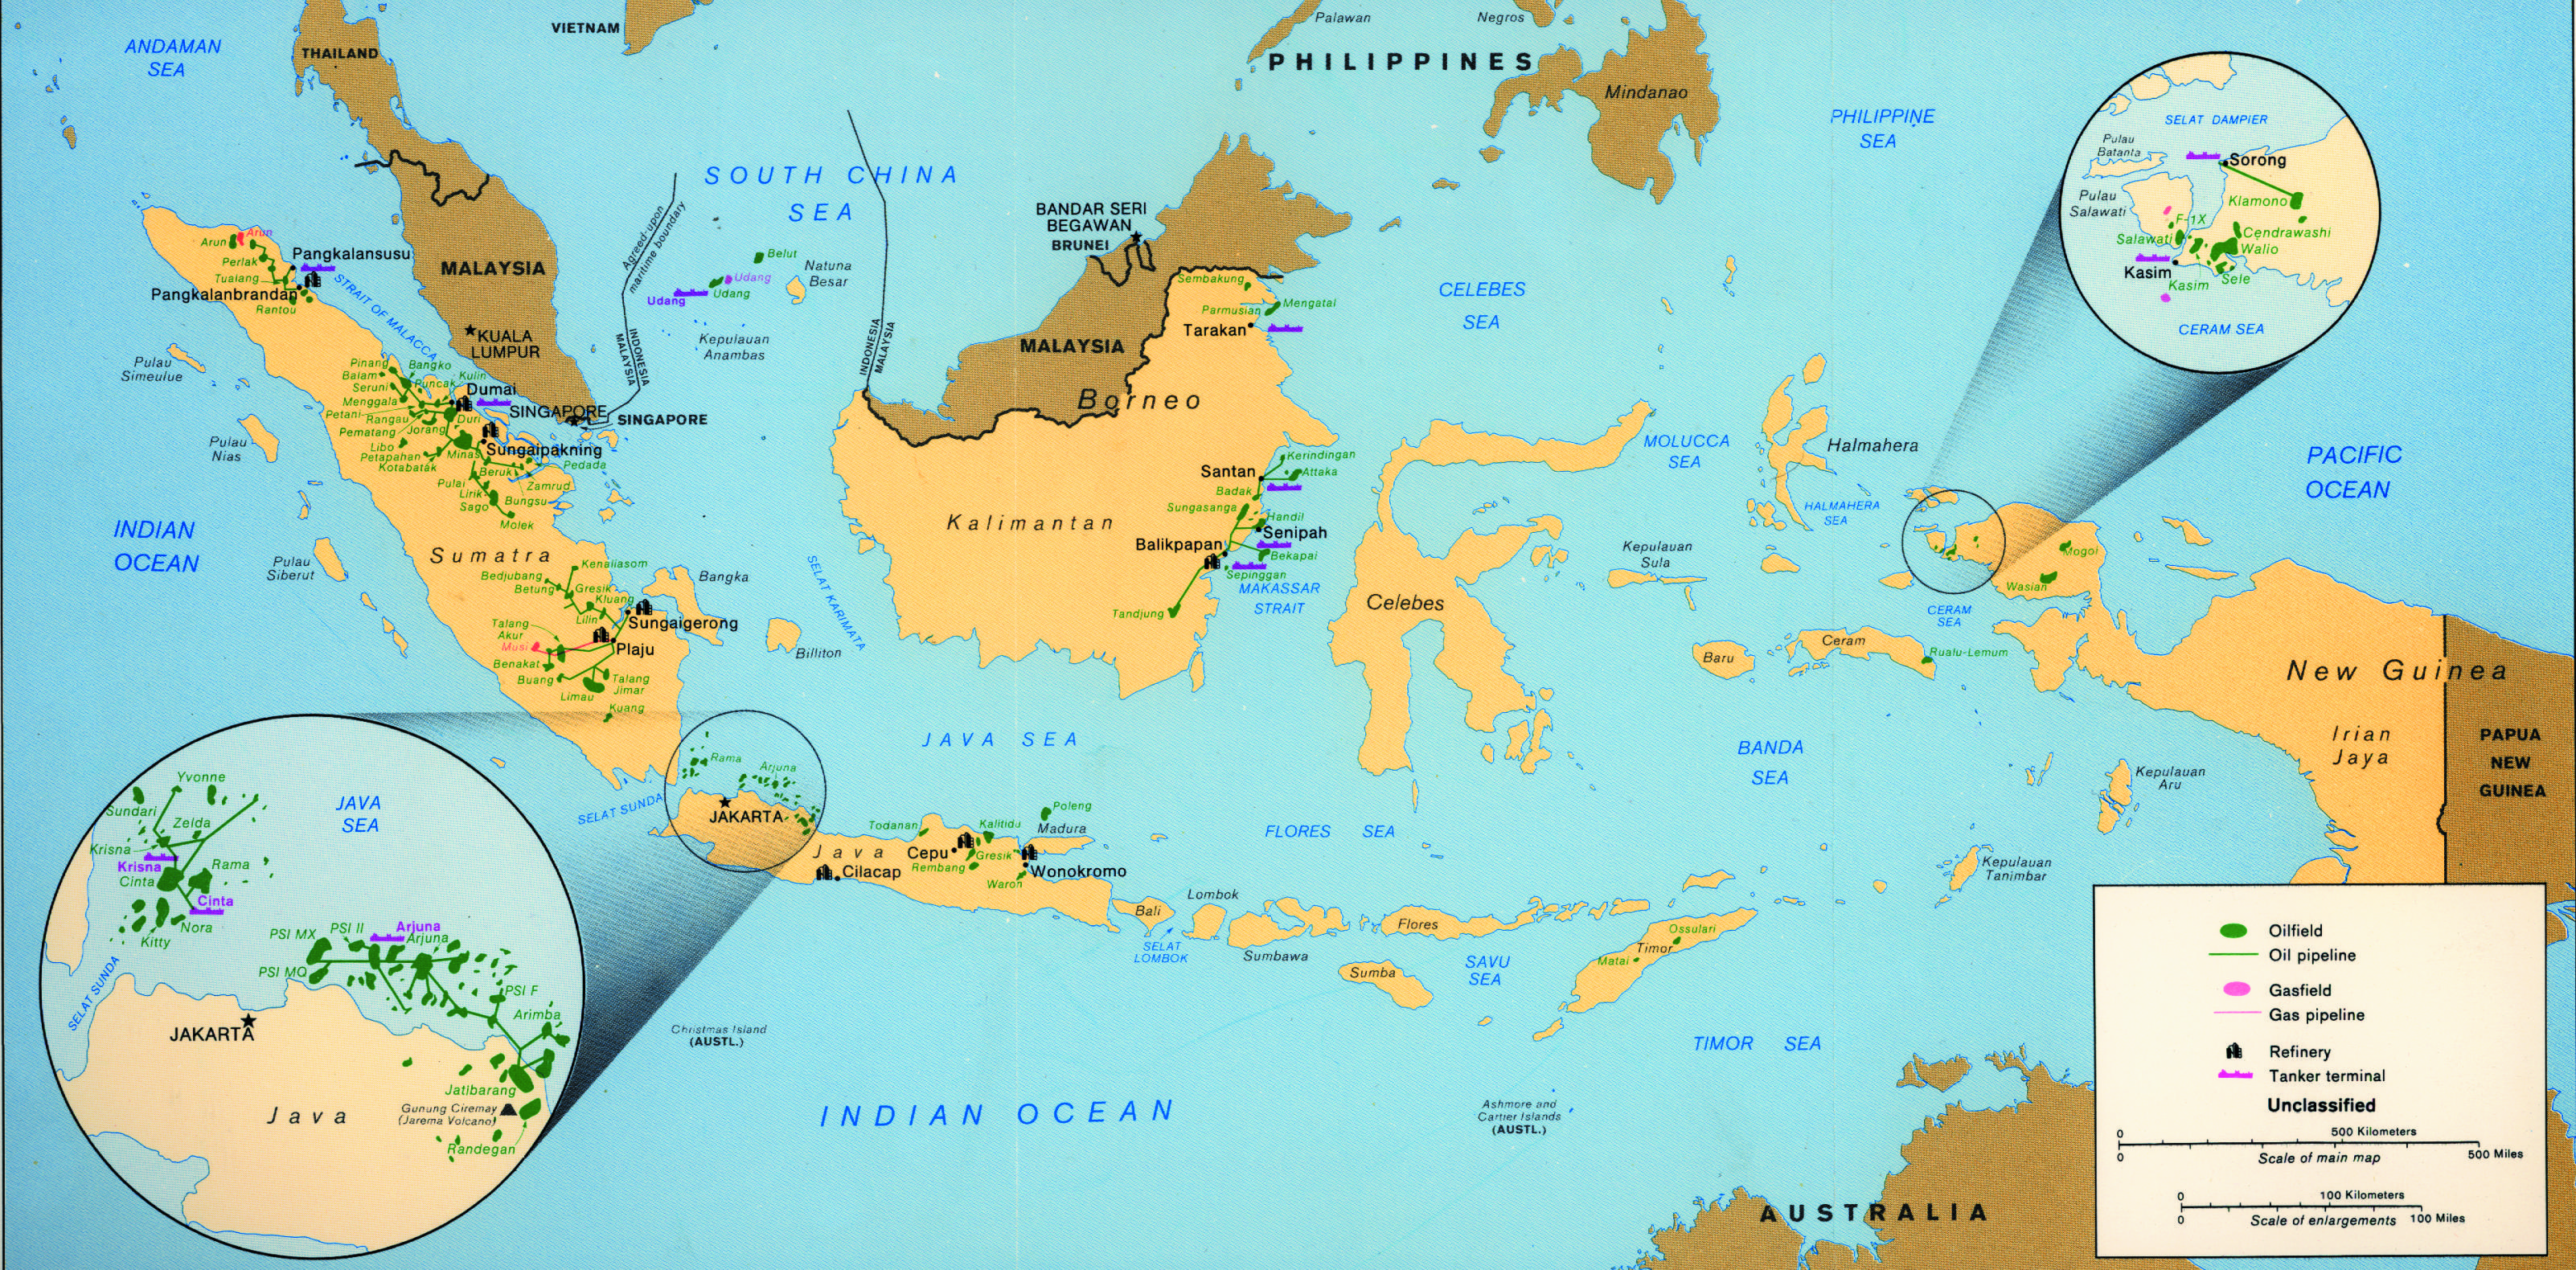 Indonesia - oil and gas • Map • PopulationData.net